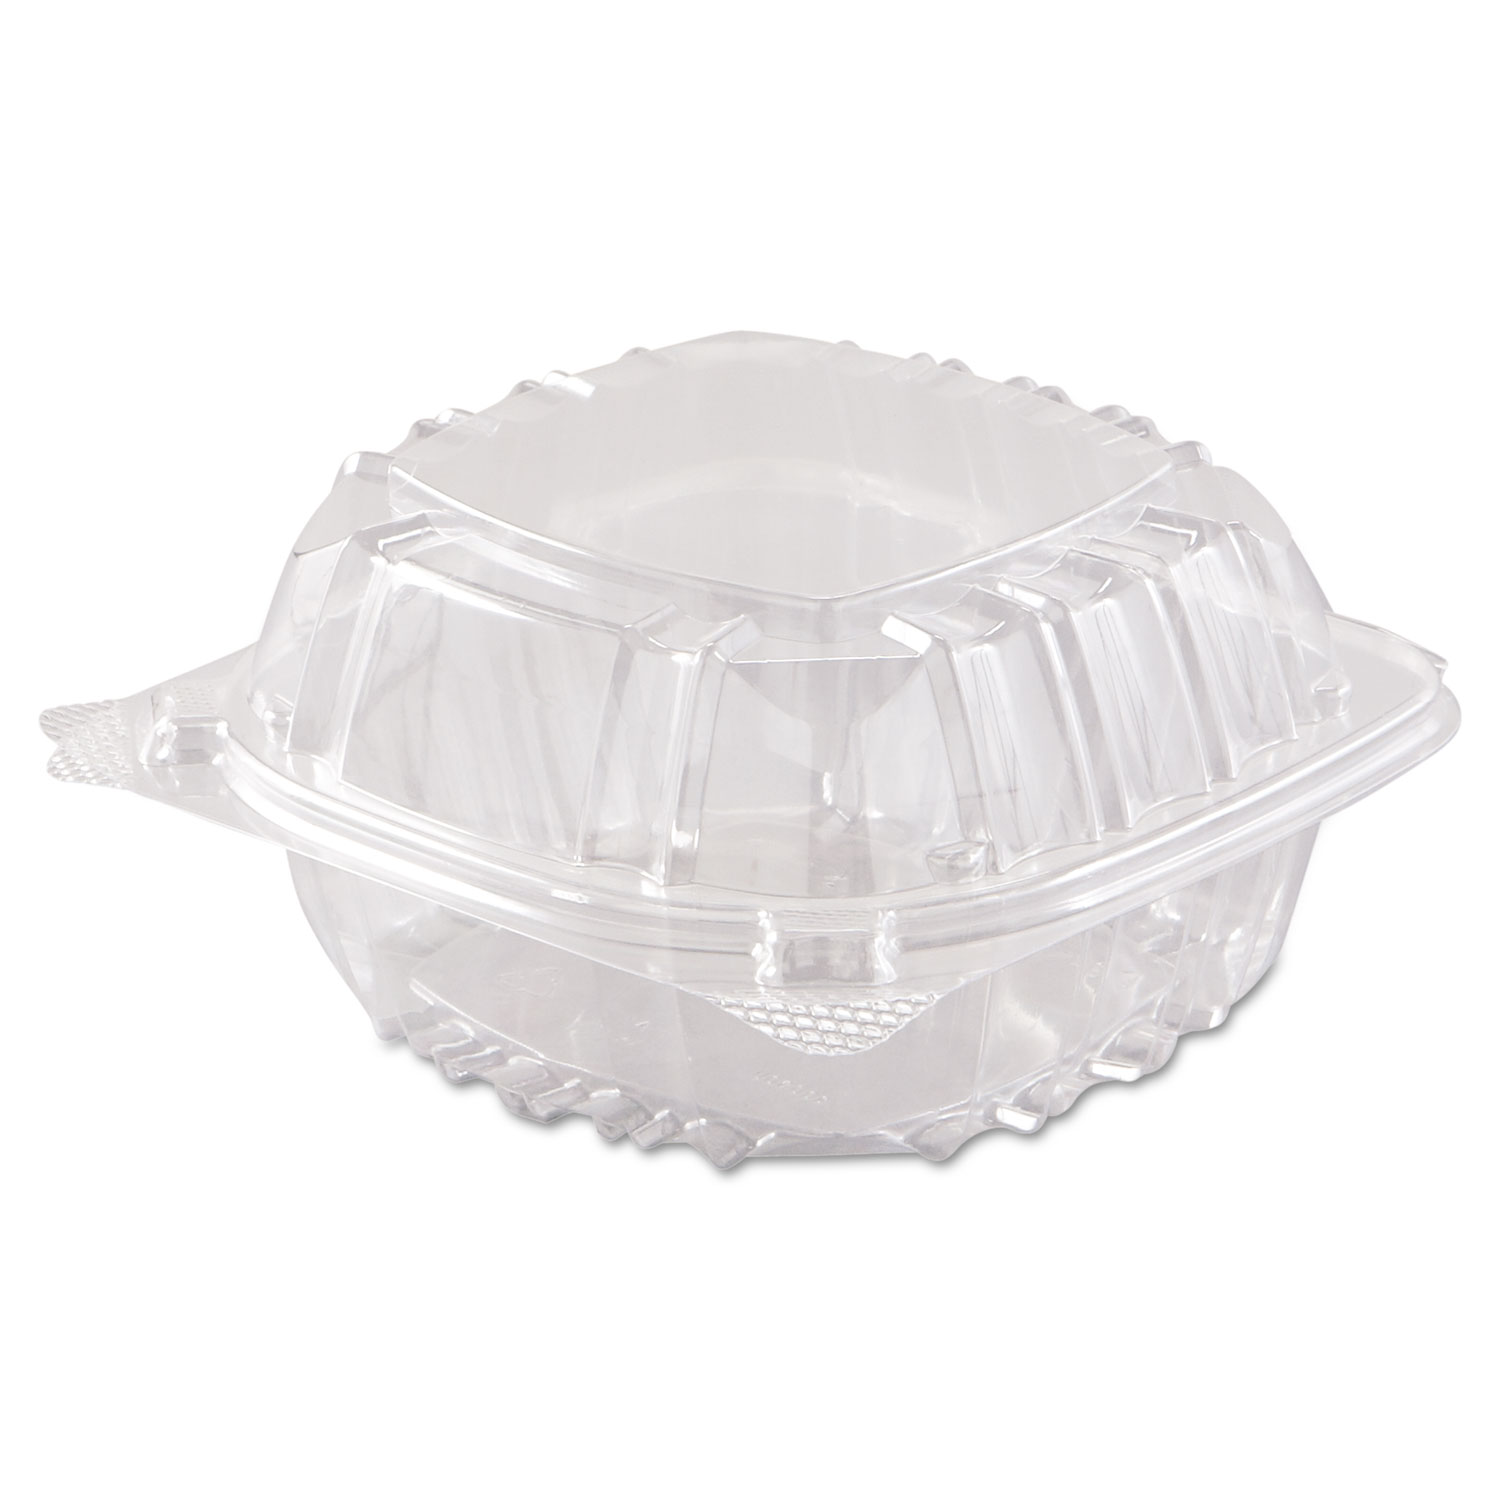  Dart C57PST1 ClearSeal Hinged-Lid Plastic Containers, 6 x 5 4/5 x 3, Clear, 500/Carton (DCCC57PST1) 